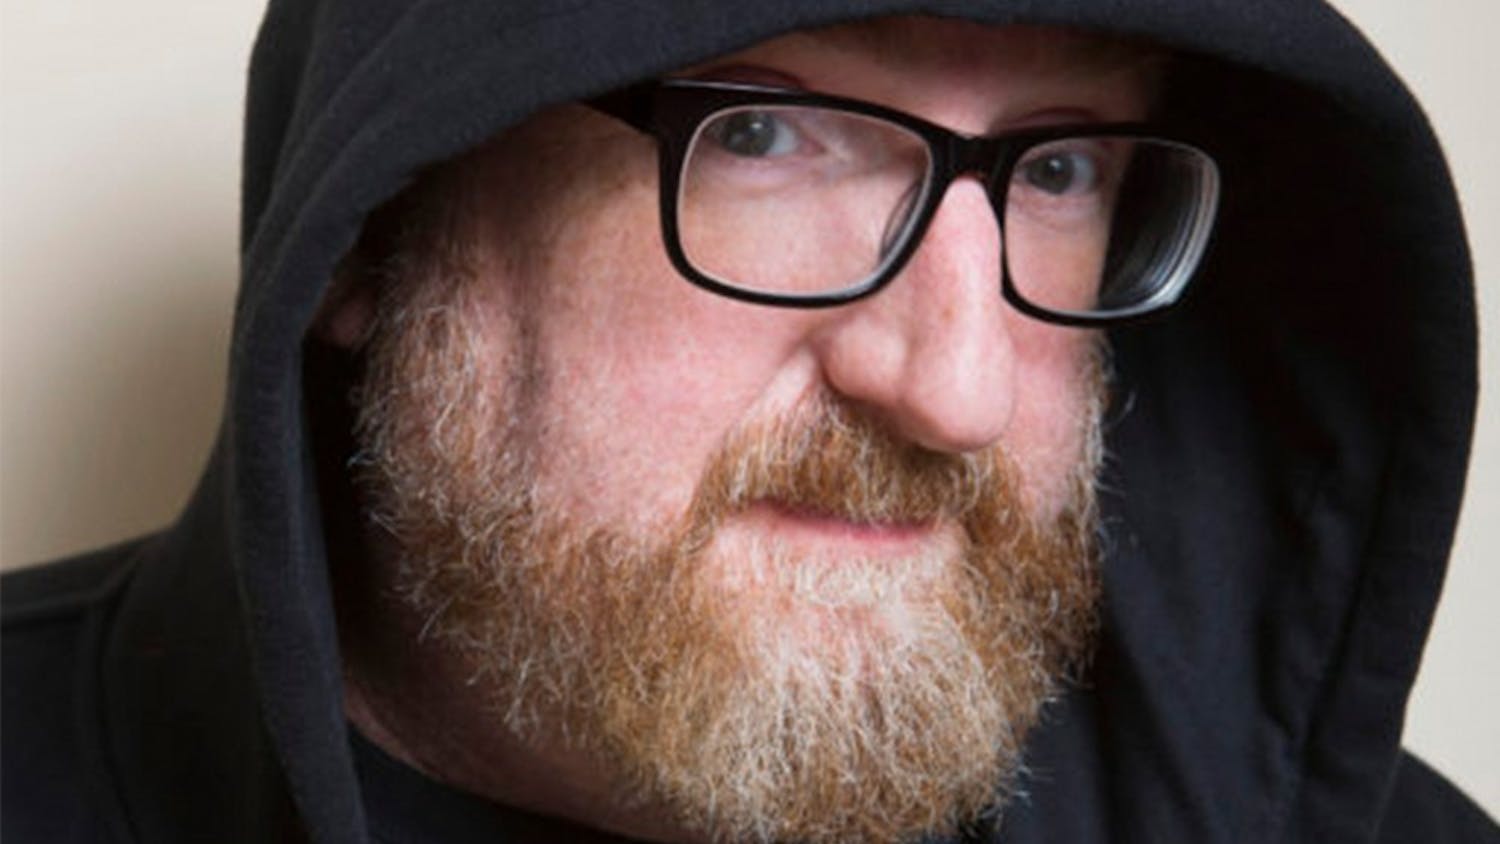 Comedian Brian Posehn has appeared on TV shows such as "Lady Dynamite," "New Girl" and "Mr. Show." He will perform at 8 p.m. and 10:30 p.m. Friday and Saturday at the Comedy Attic.&nbsp;